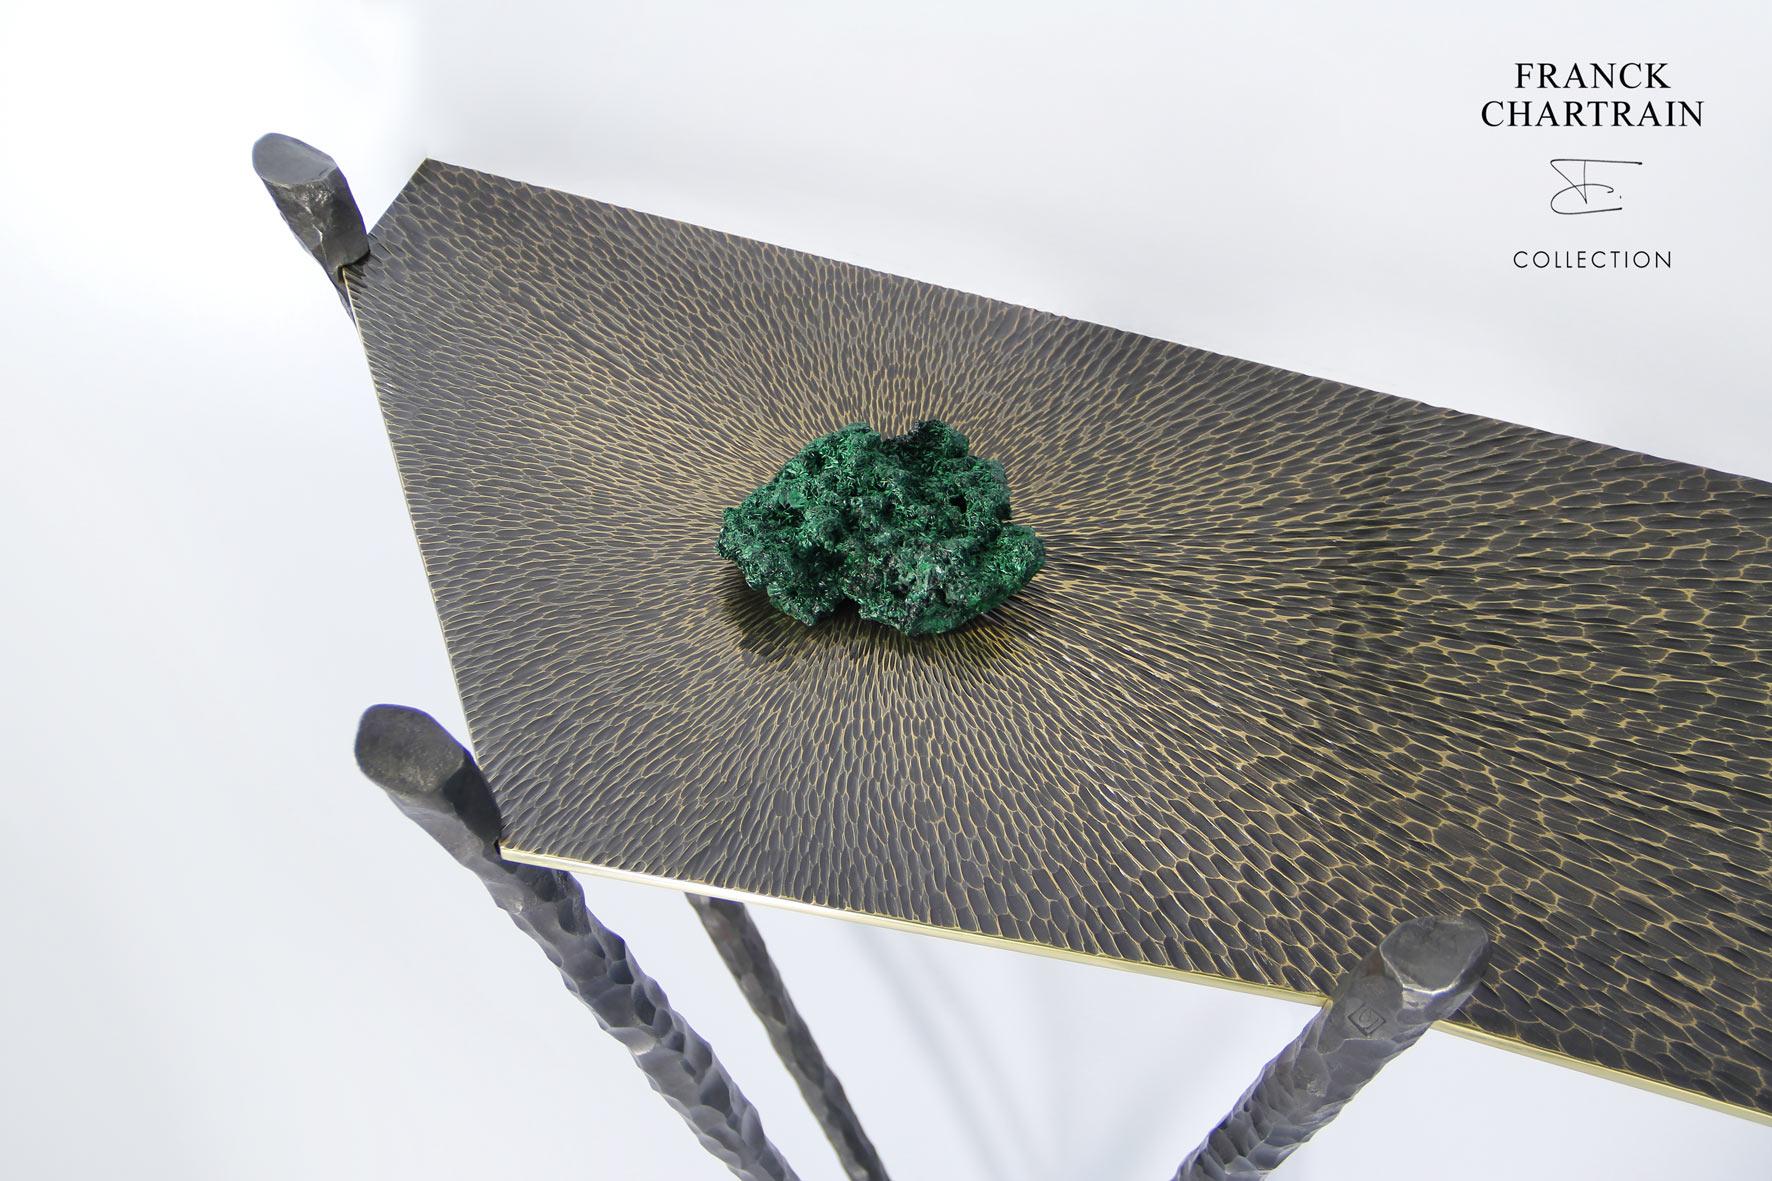 This beautiful console table is handmade by Franck Chartrain, a famous French Artist-Designer.

The angular and slender top made in polished bronze is gouged with bright edges.
Its texture worked with a unique dark satin finish is playing with the